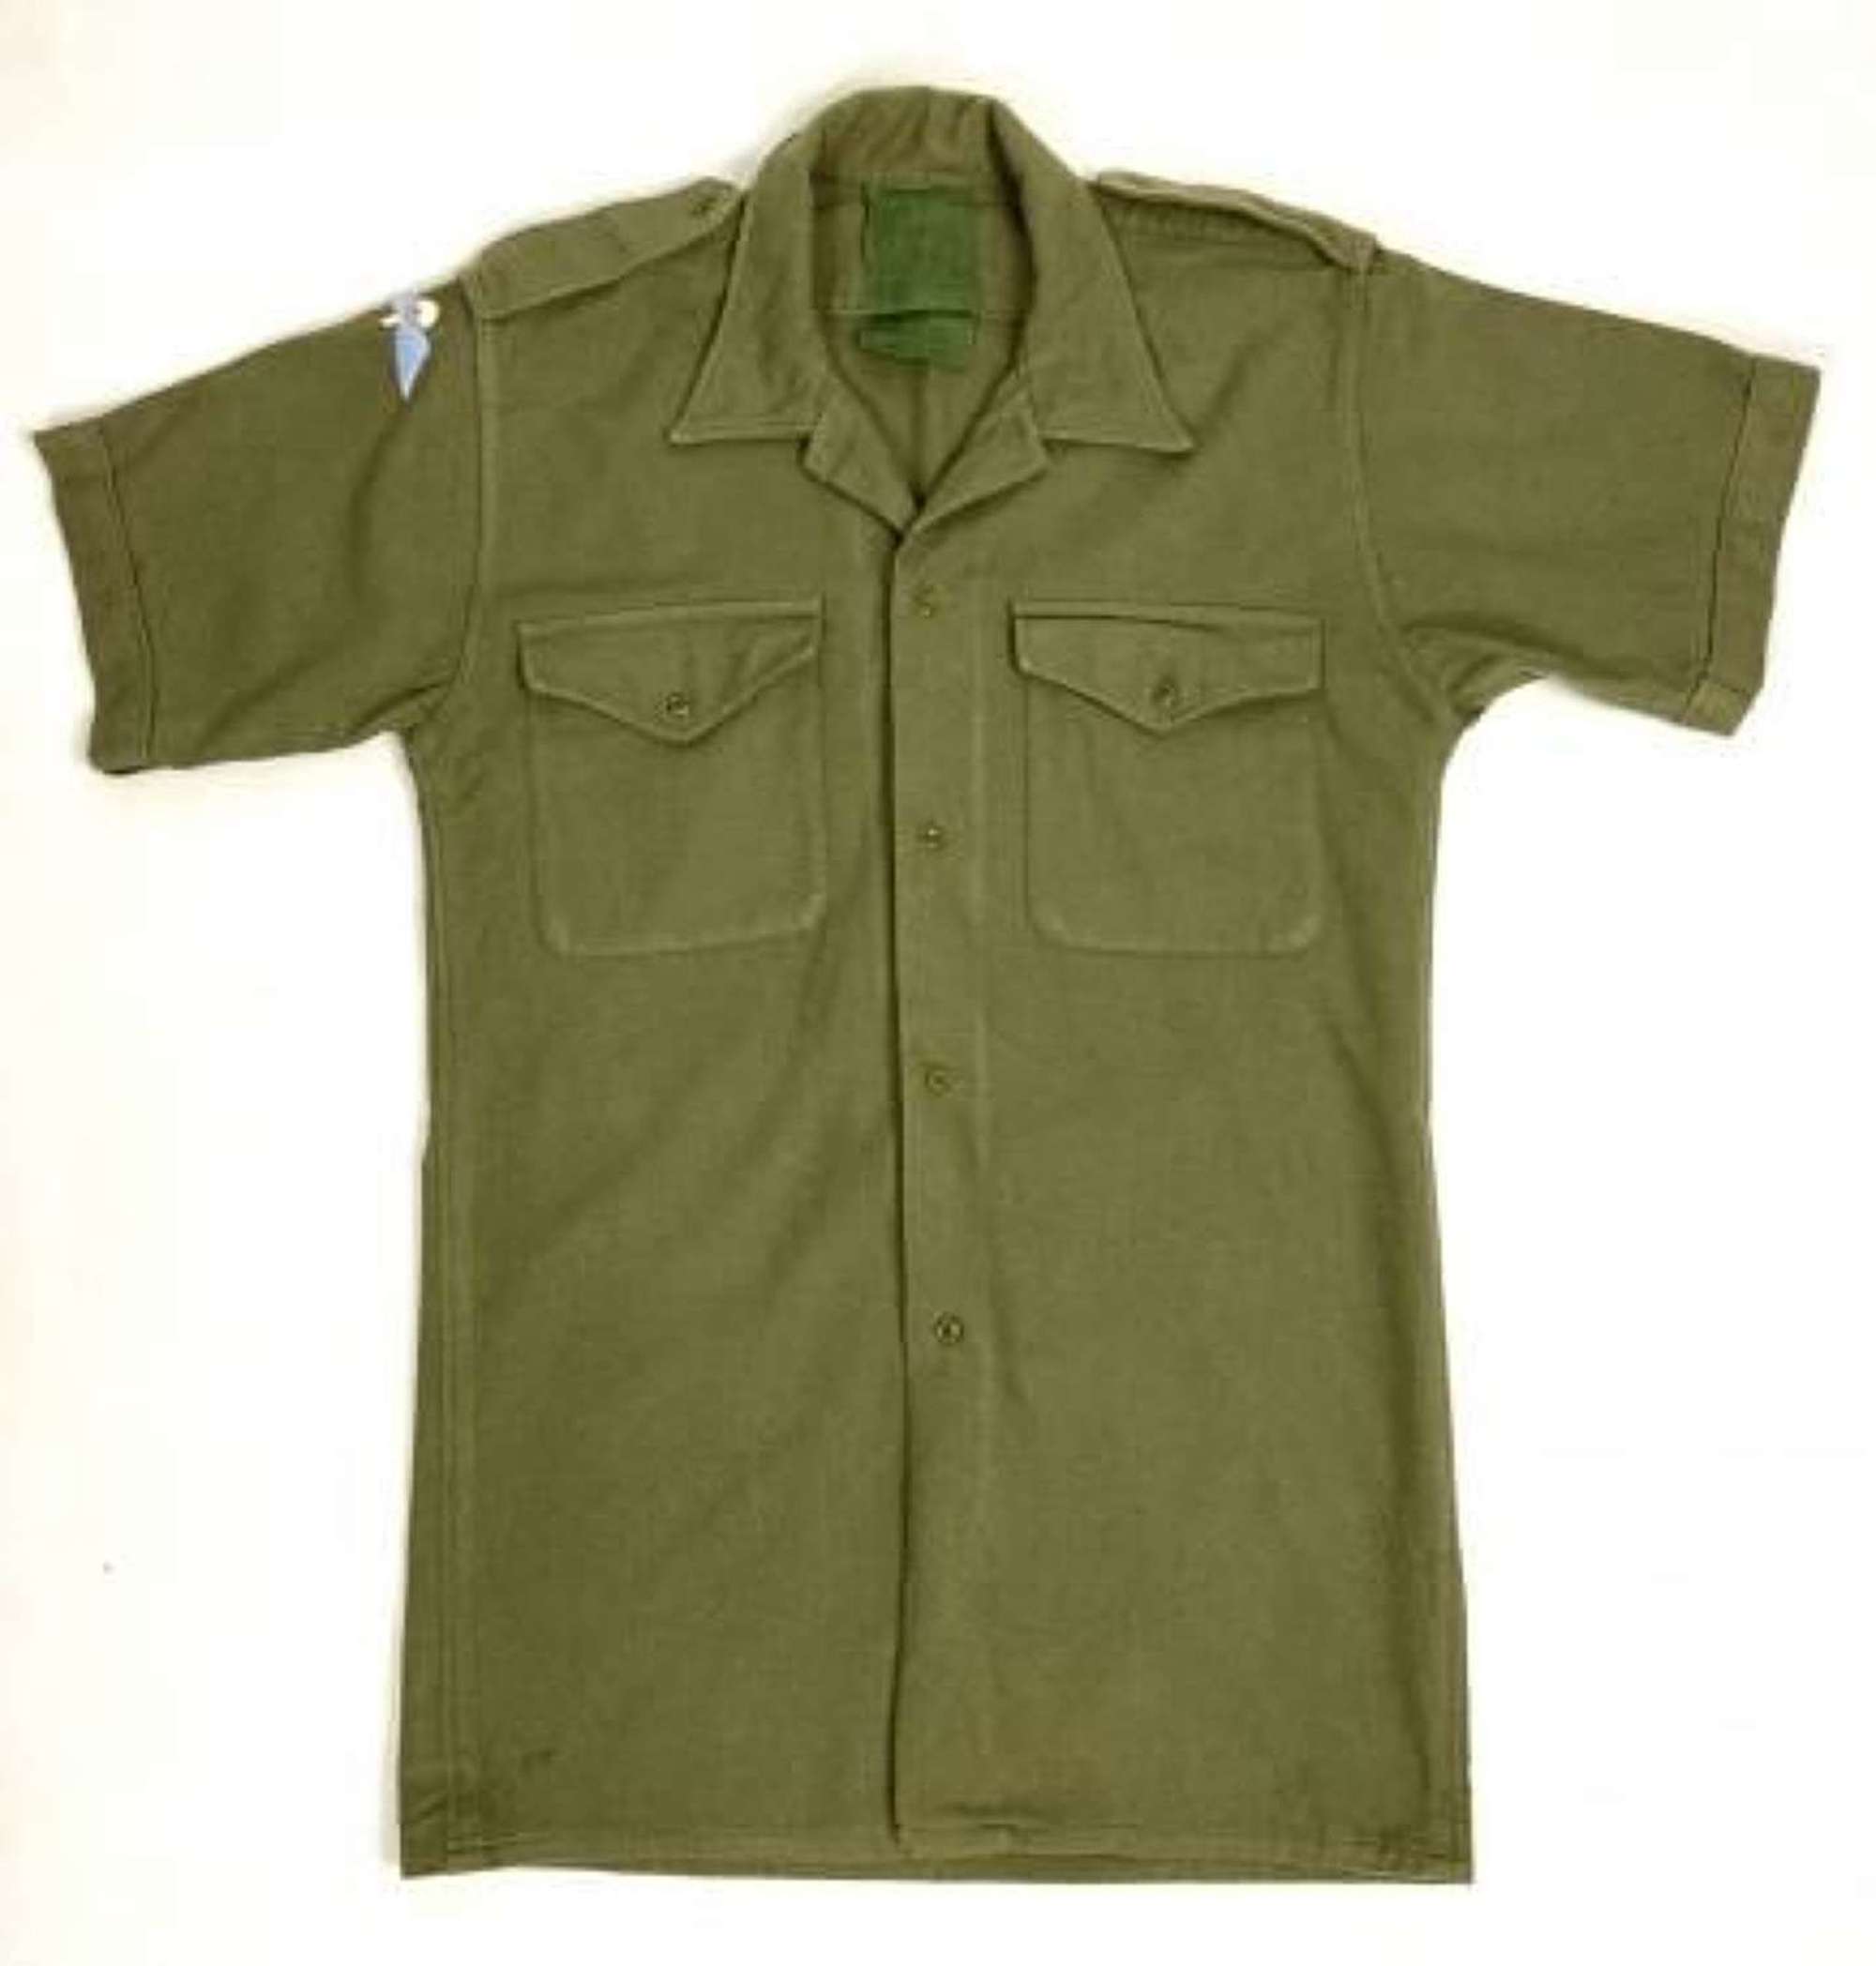 Original 1970s British Army Shirt with Parachute Qualification Wing